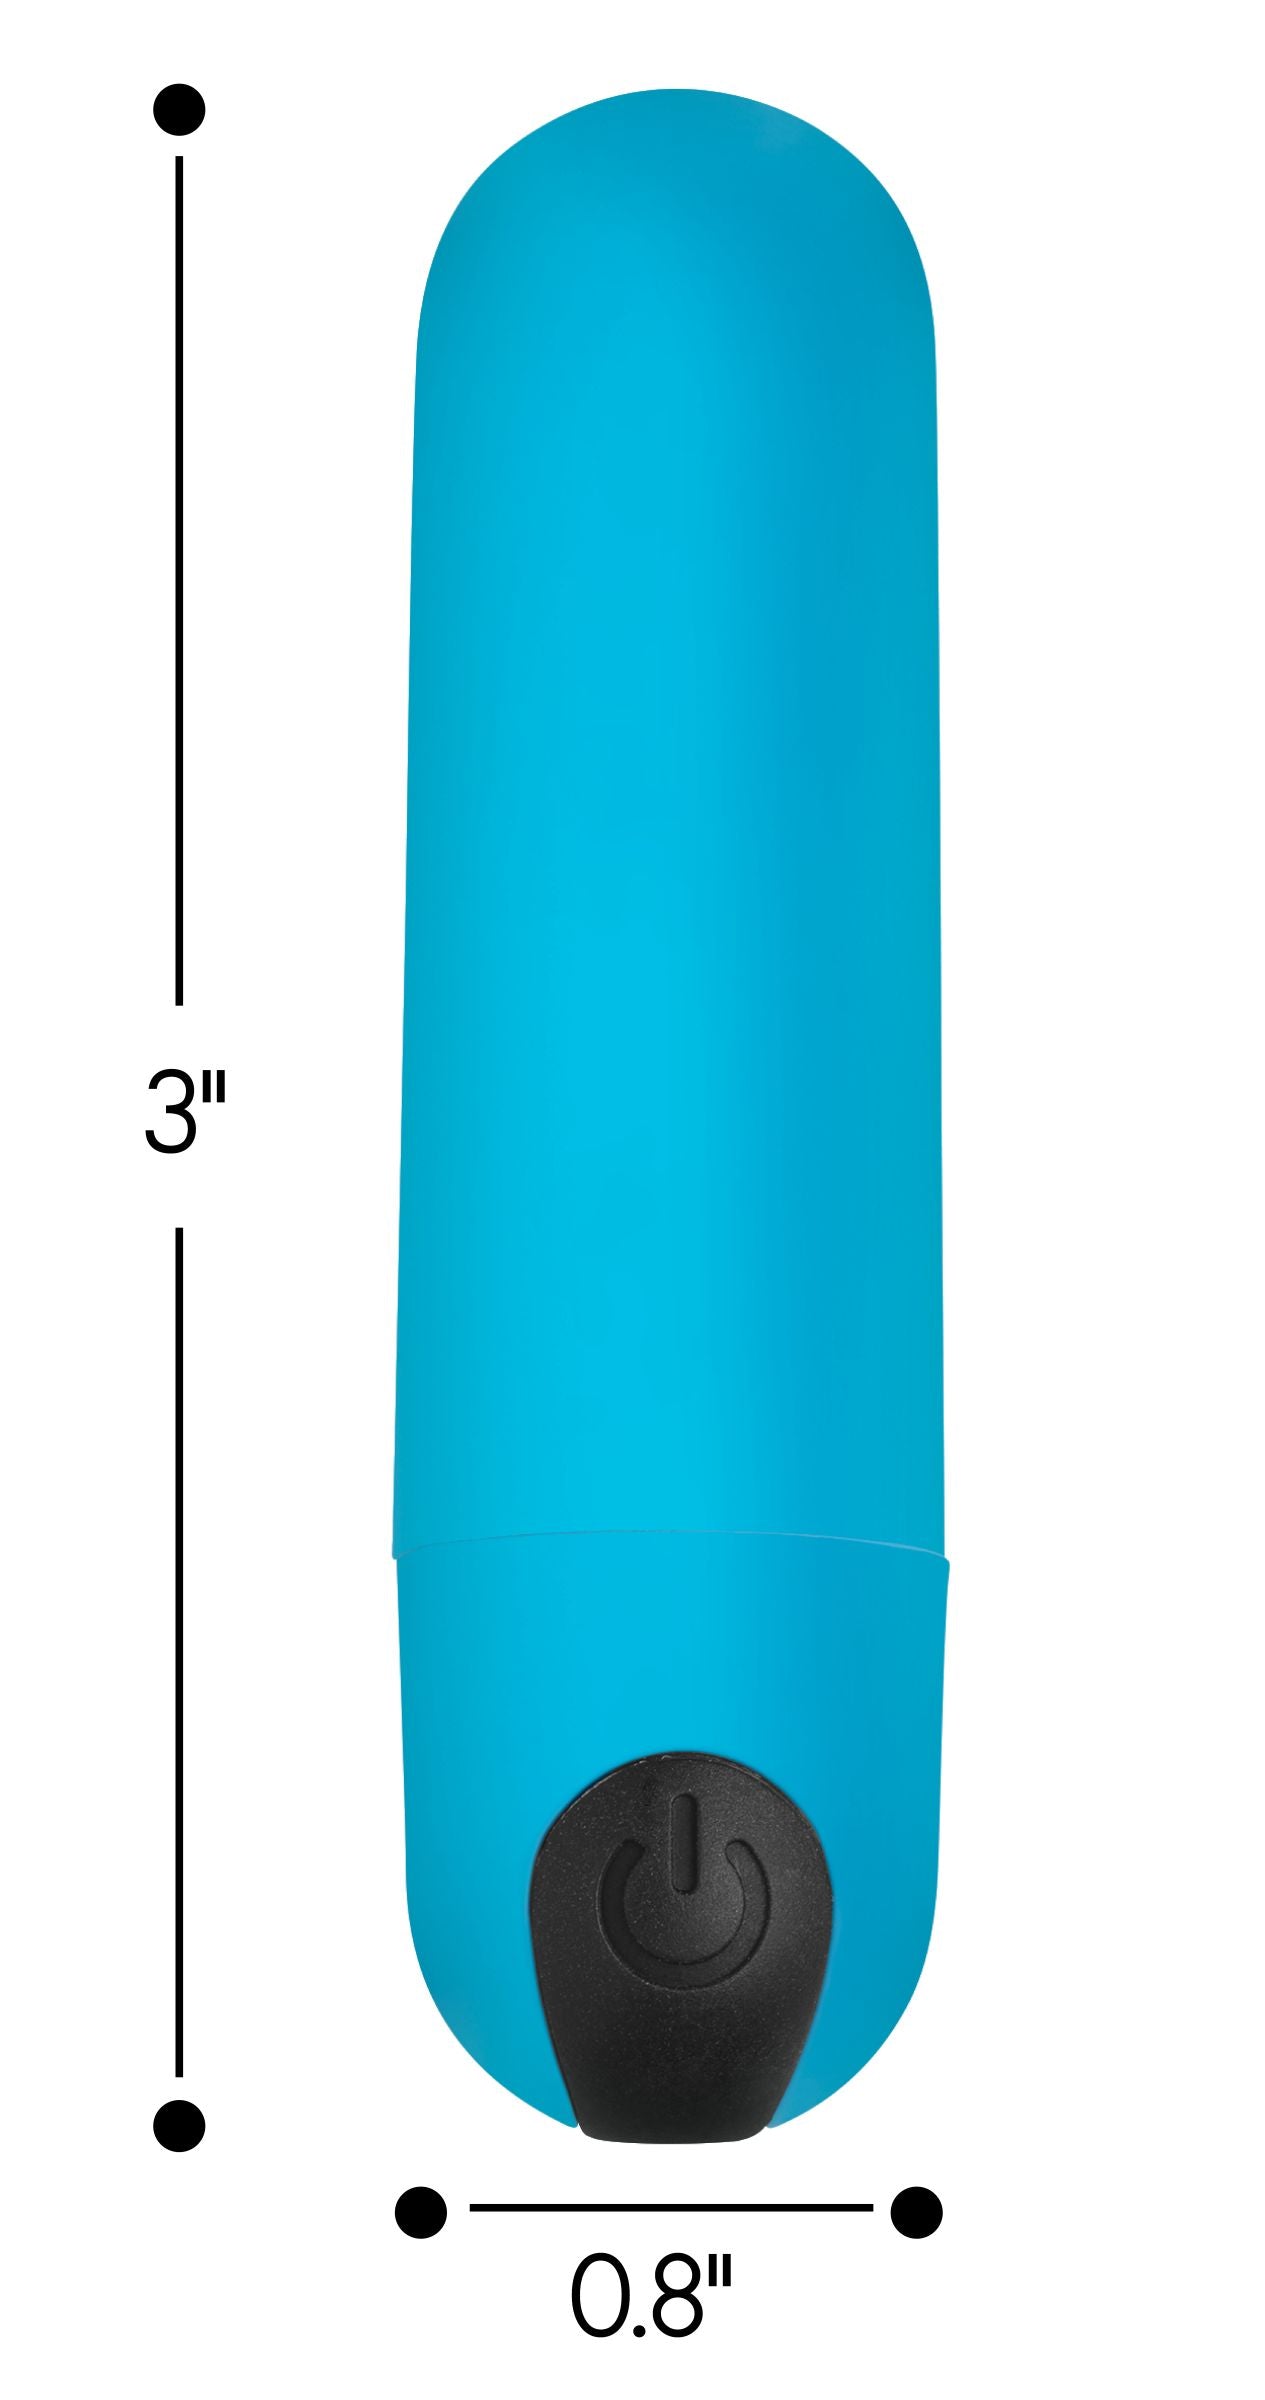 Vibrating Bullet With Remote Control - Blue